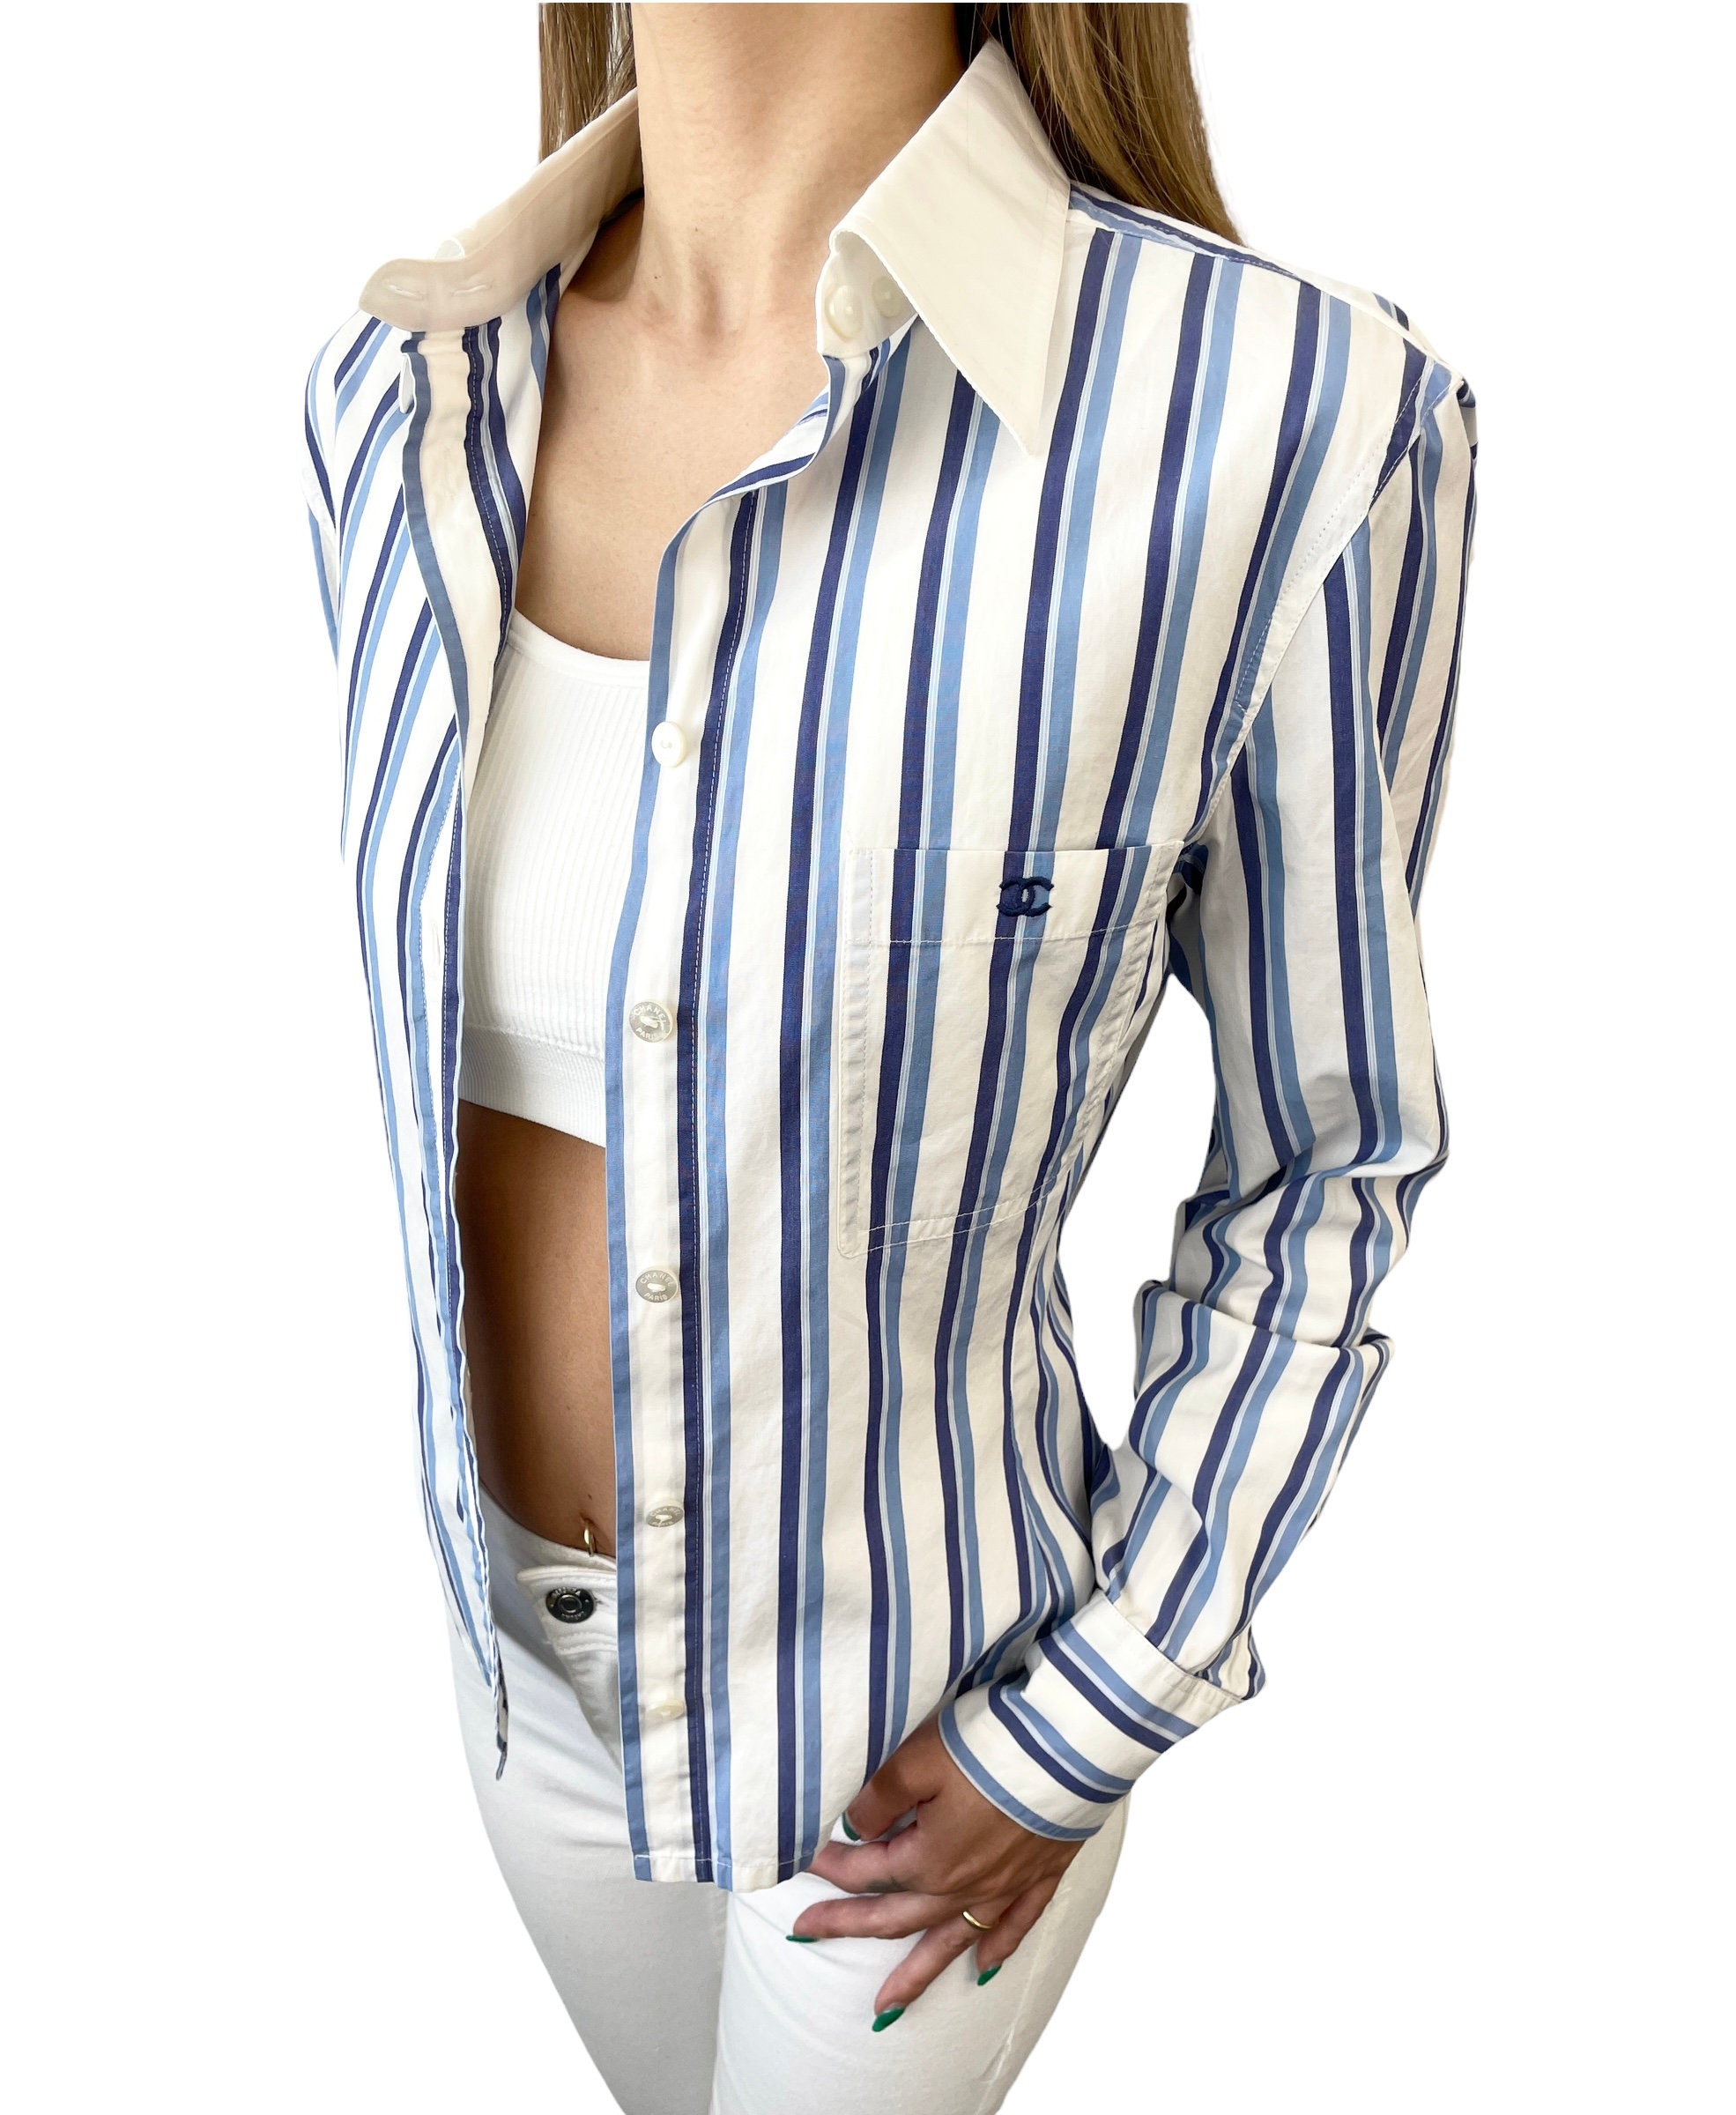 Chanel CHANEL Stripe Coco Mark Button Blouse Long Sleeve Shirt Red